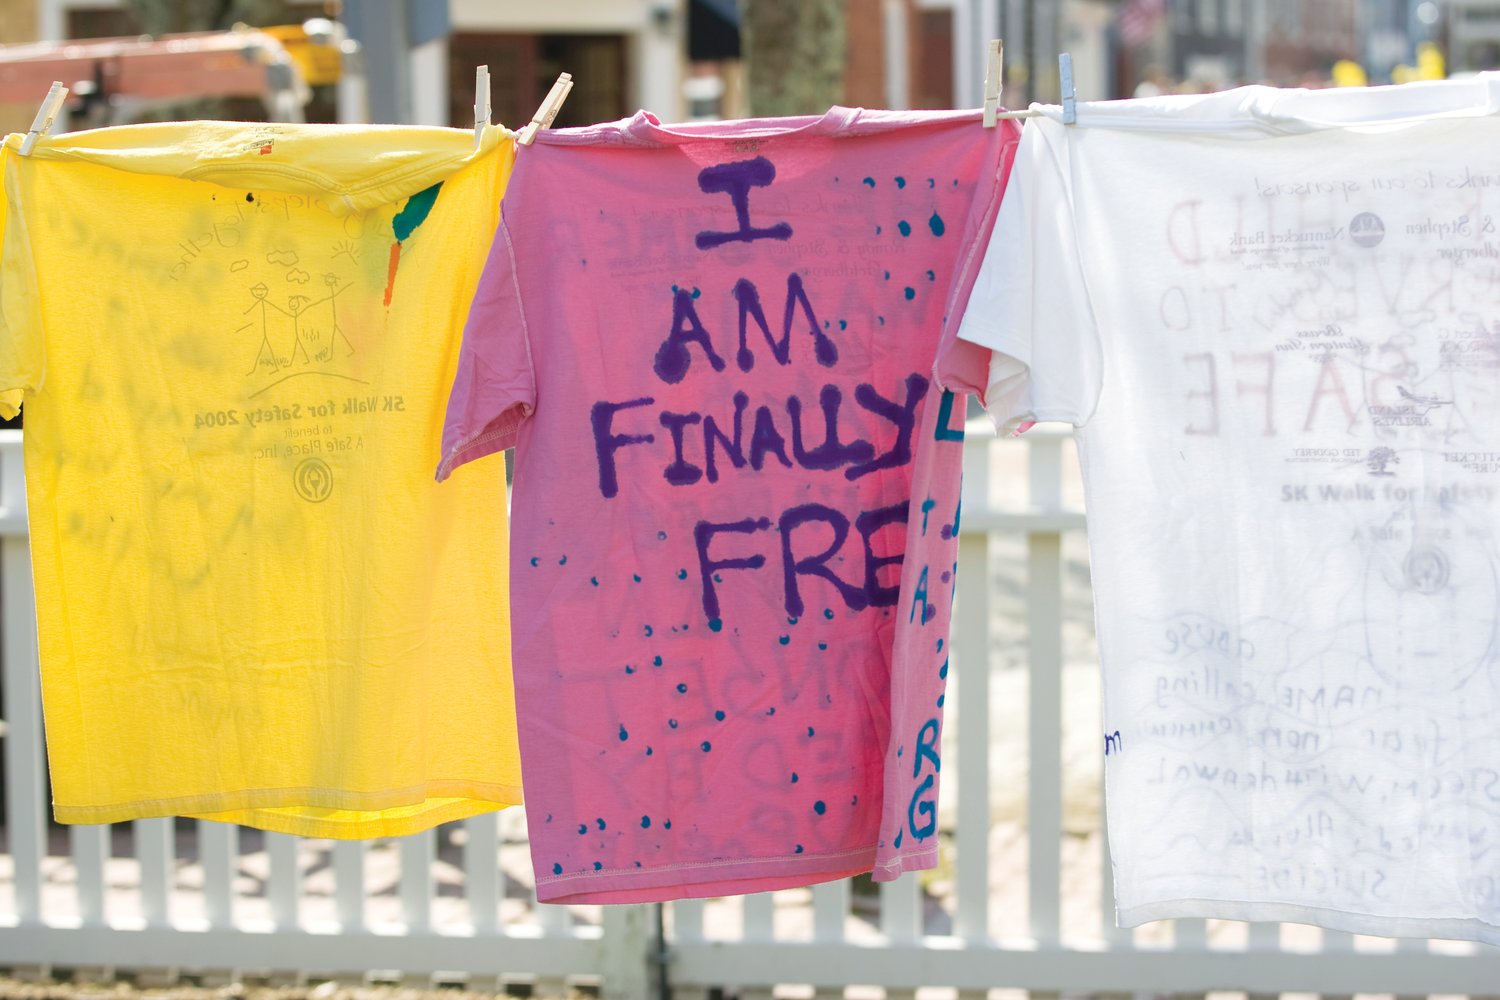 A Safe Place’s Clothesline Project, which will be held April 24 at the Atheneum, commemorates victims of domestic violence and sexual assault.